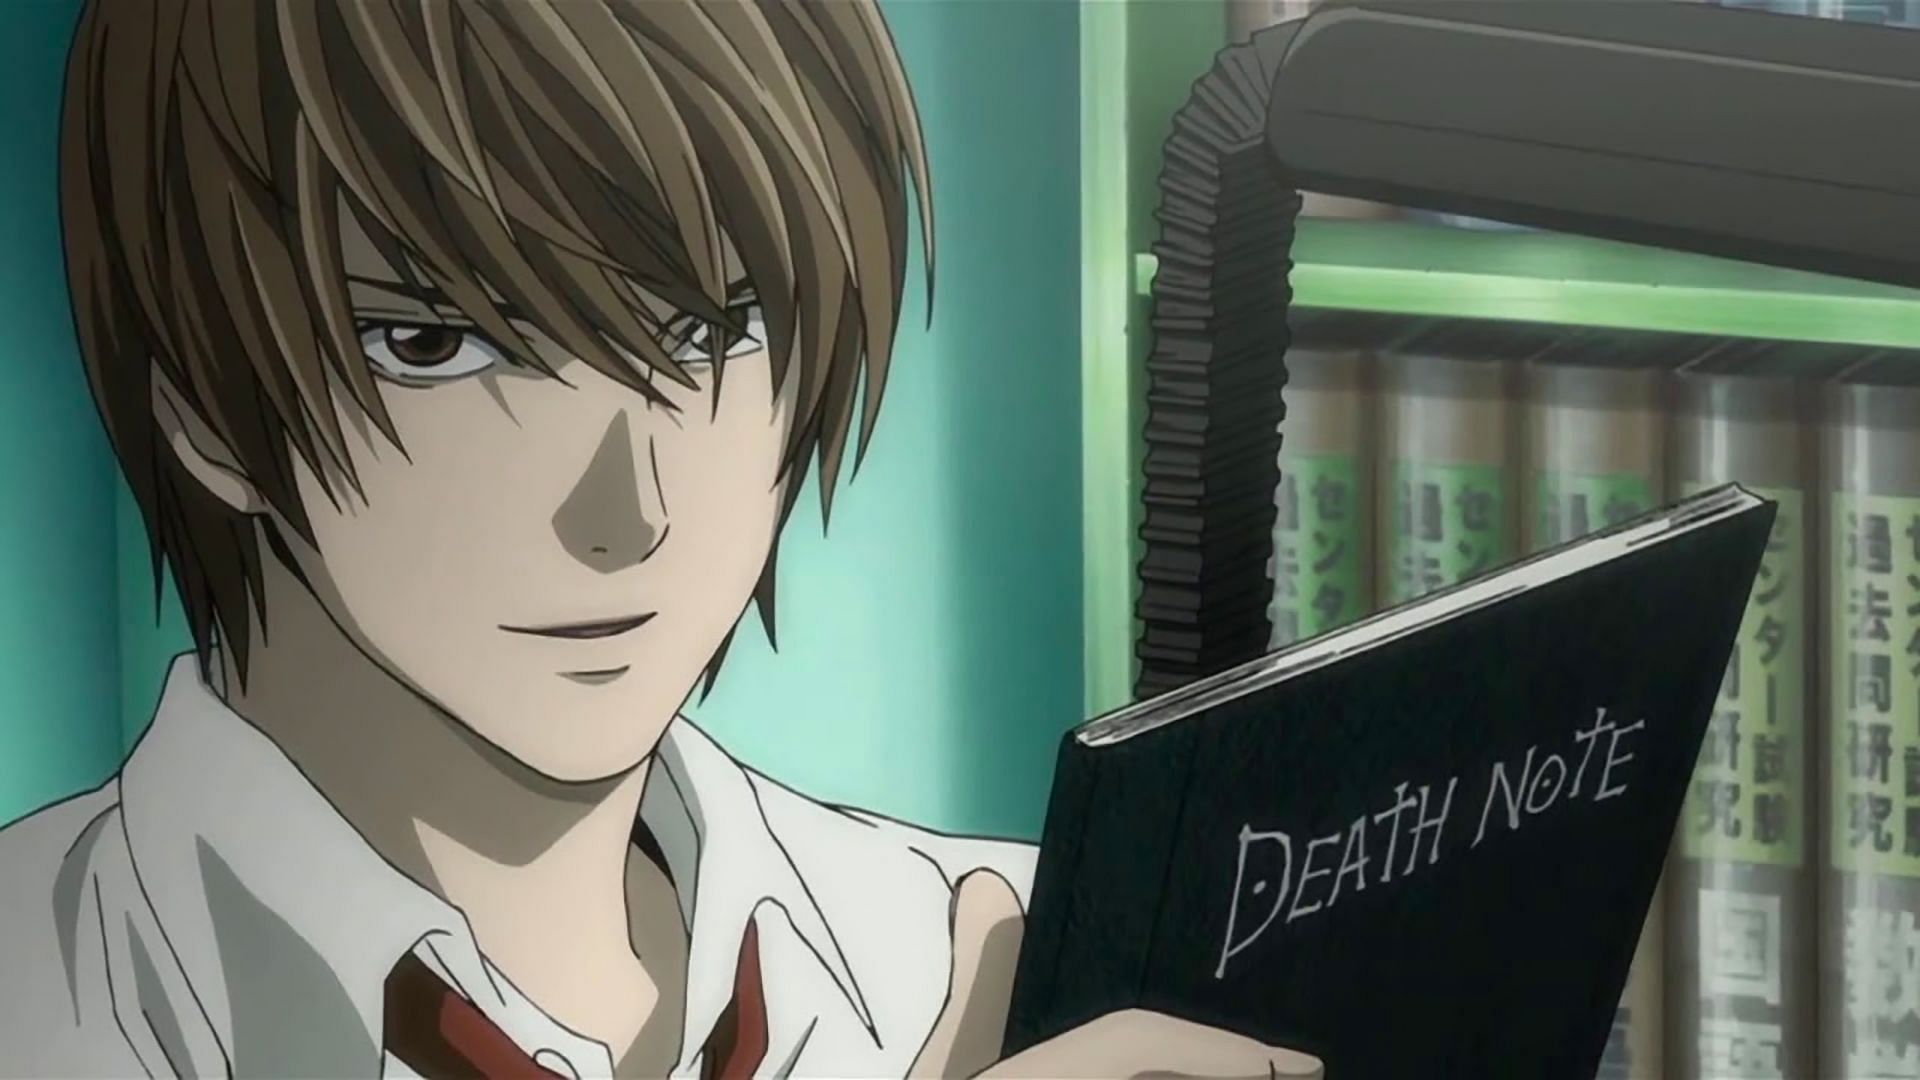 Light and his death note (Image via YouTube)